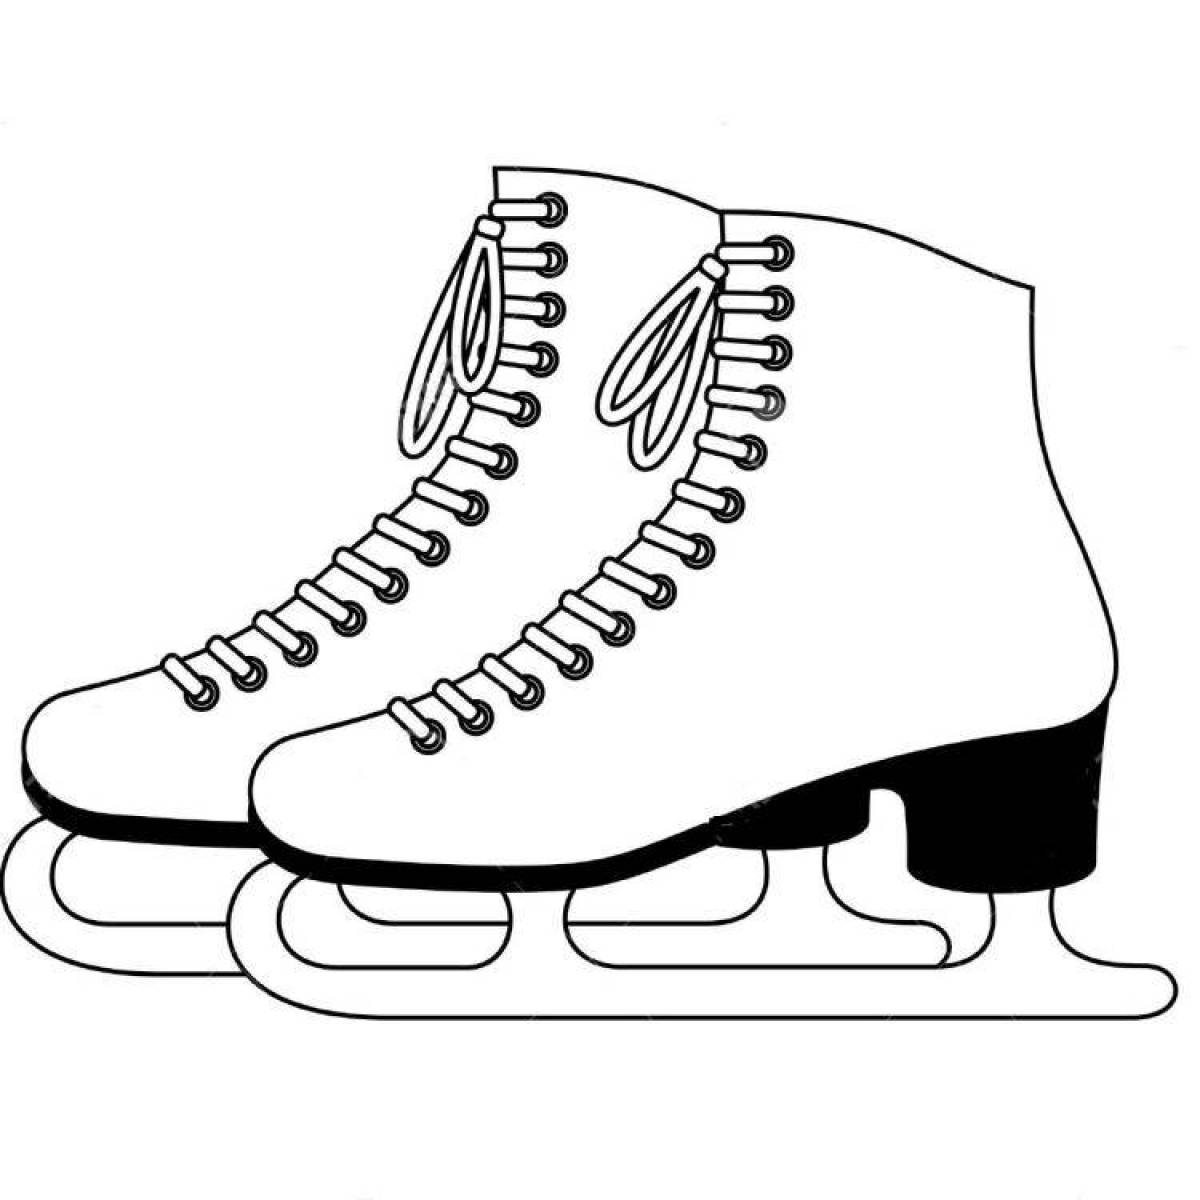 Playful figure skate coloring page